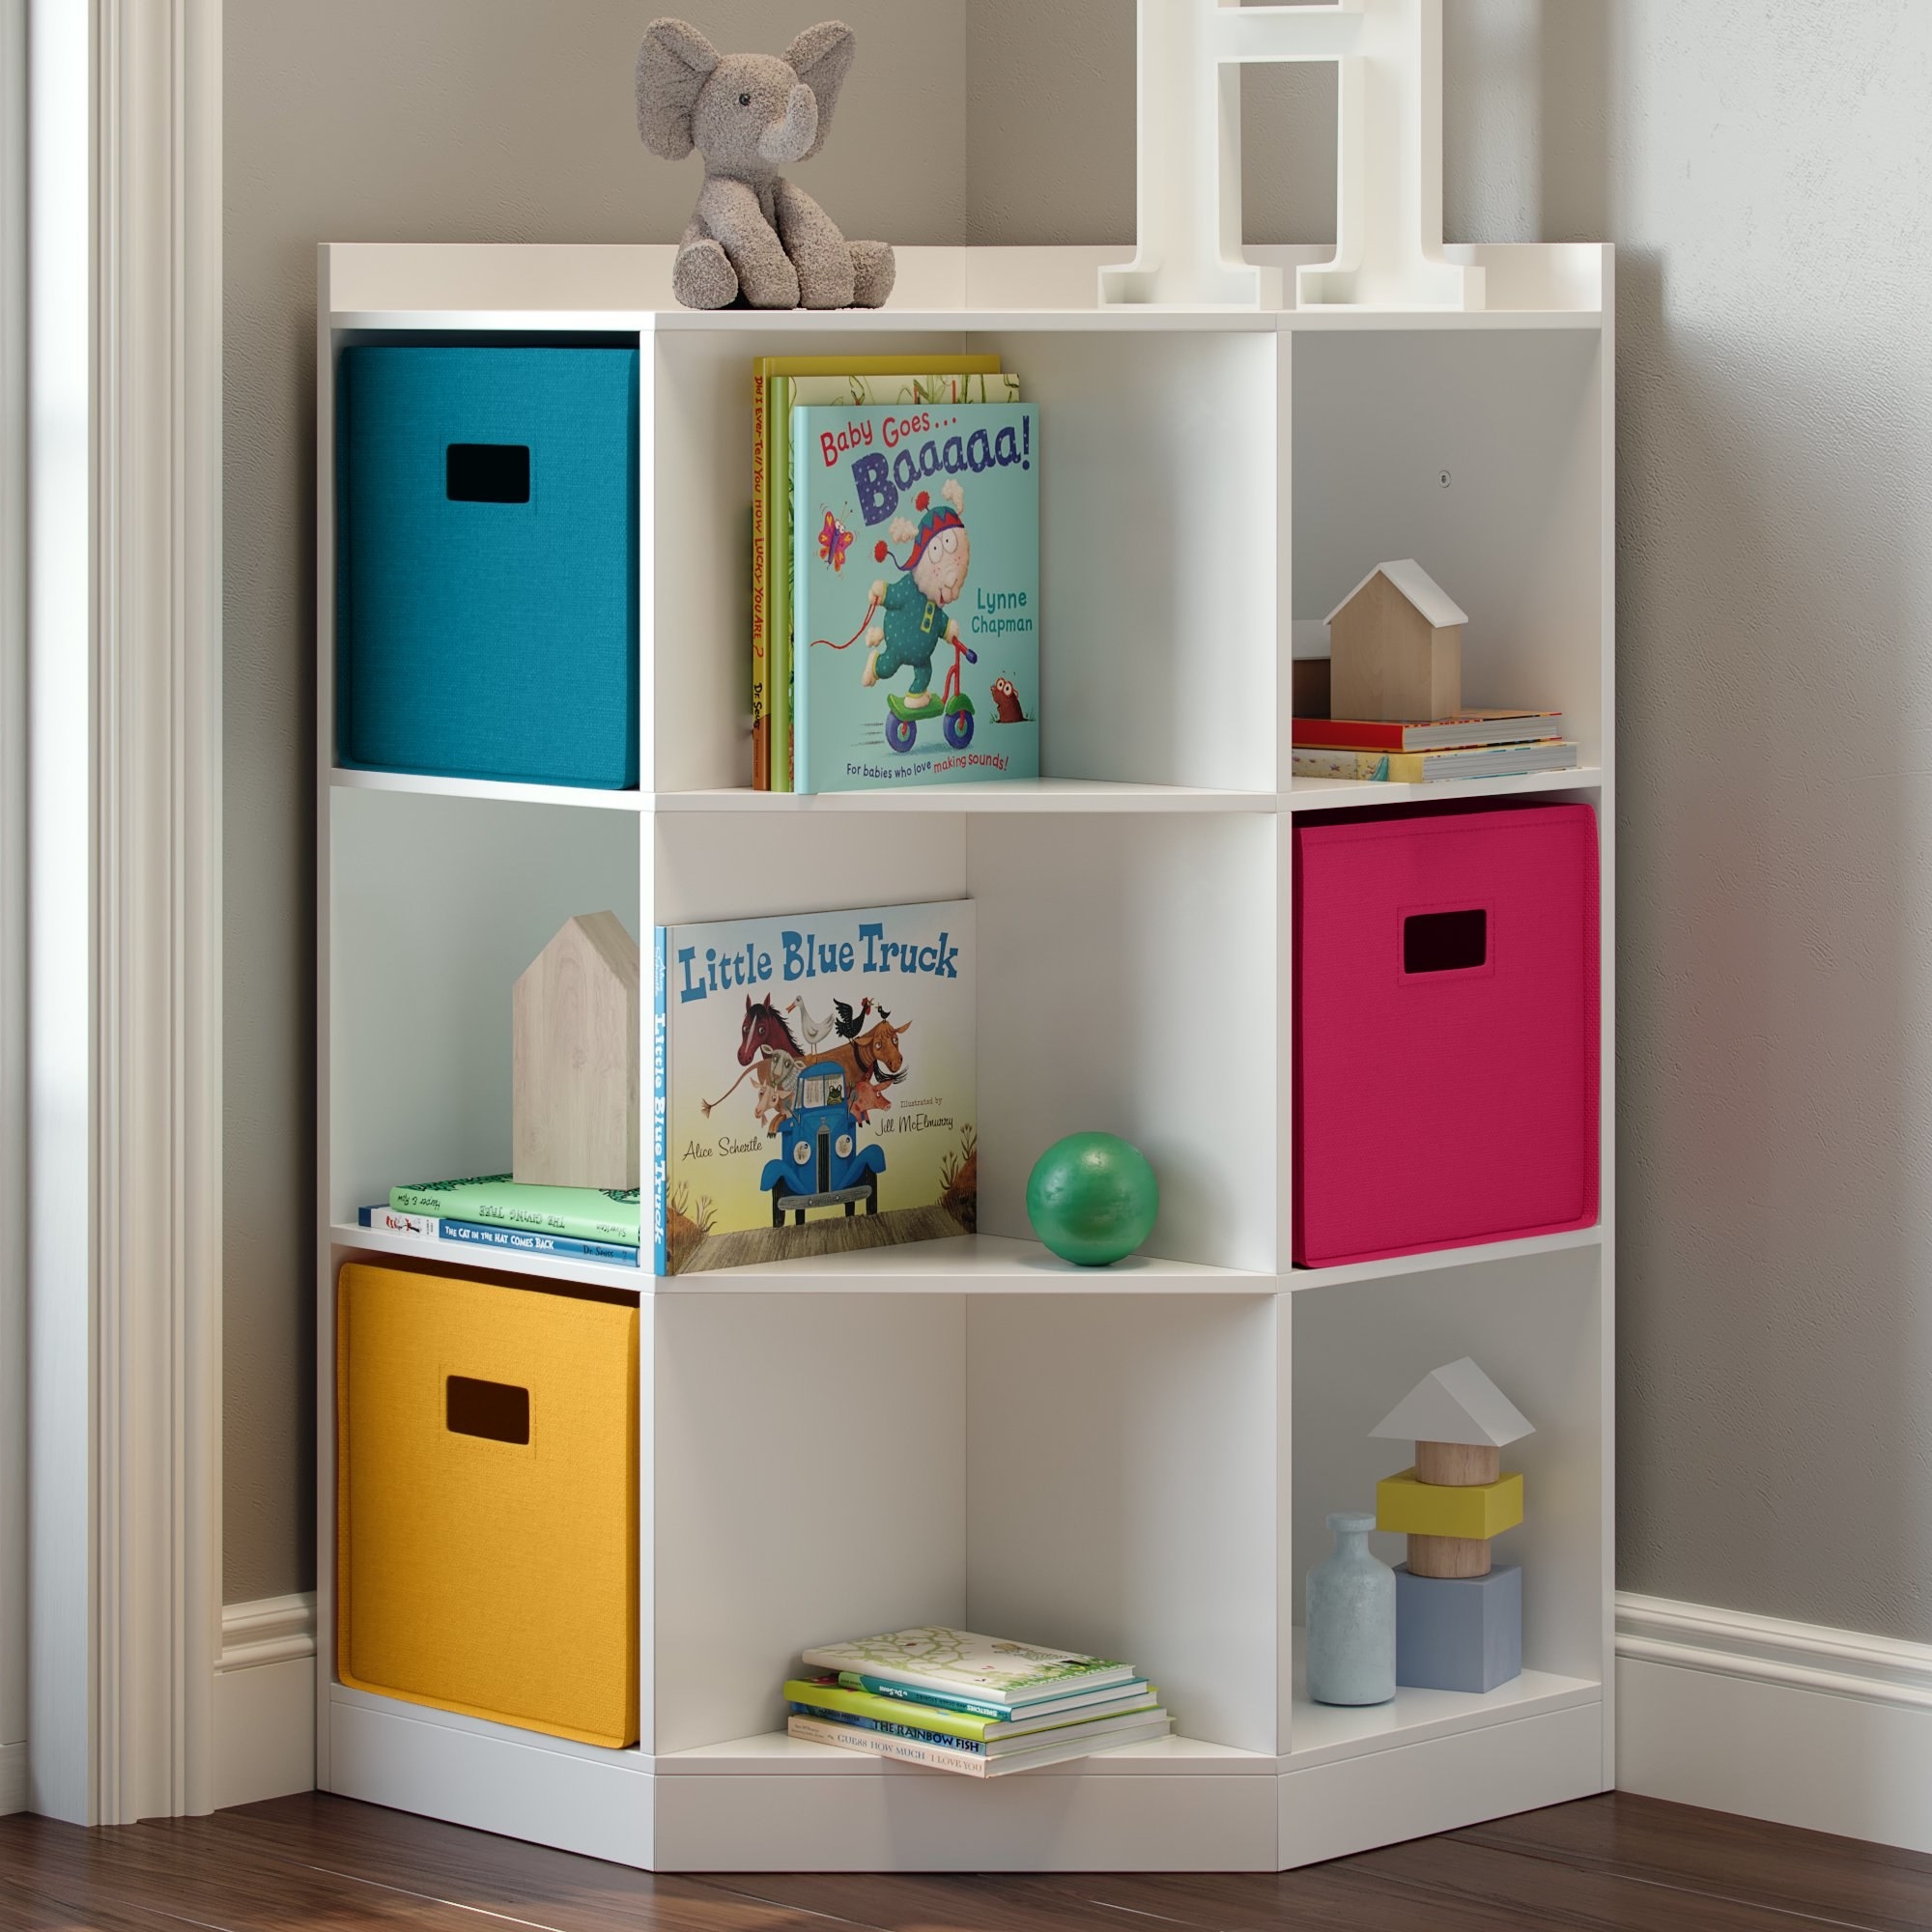 the cubby in a corner with toys and books